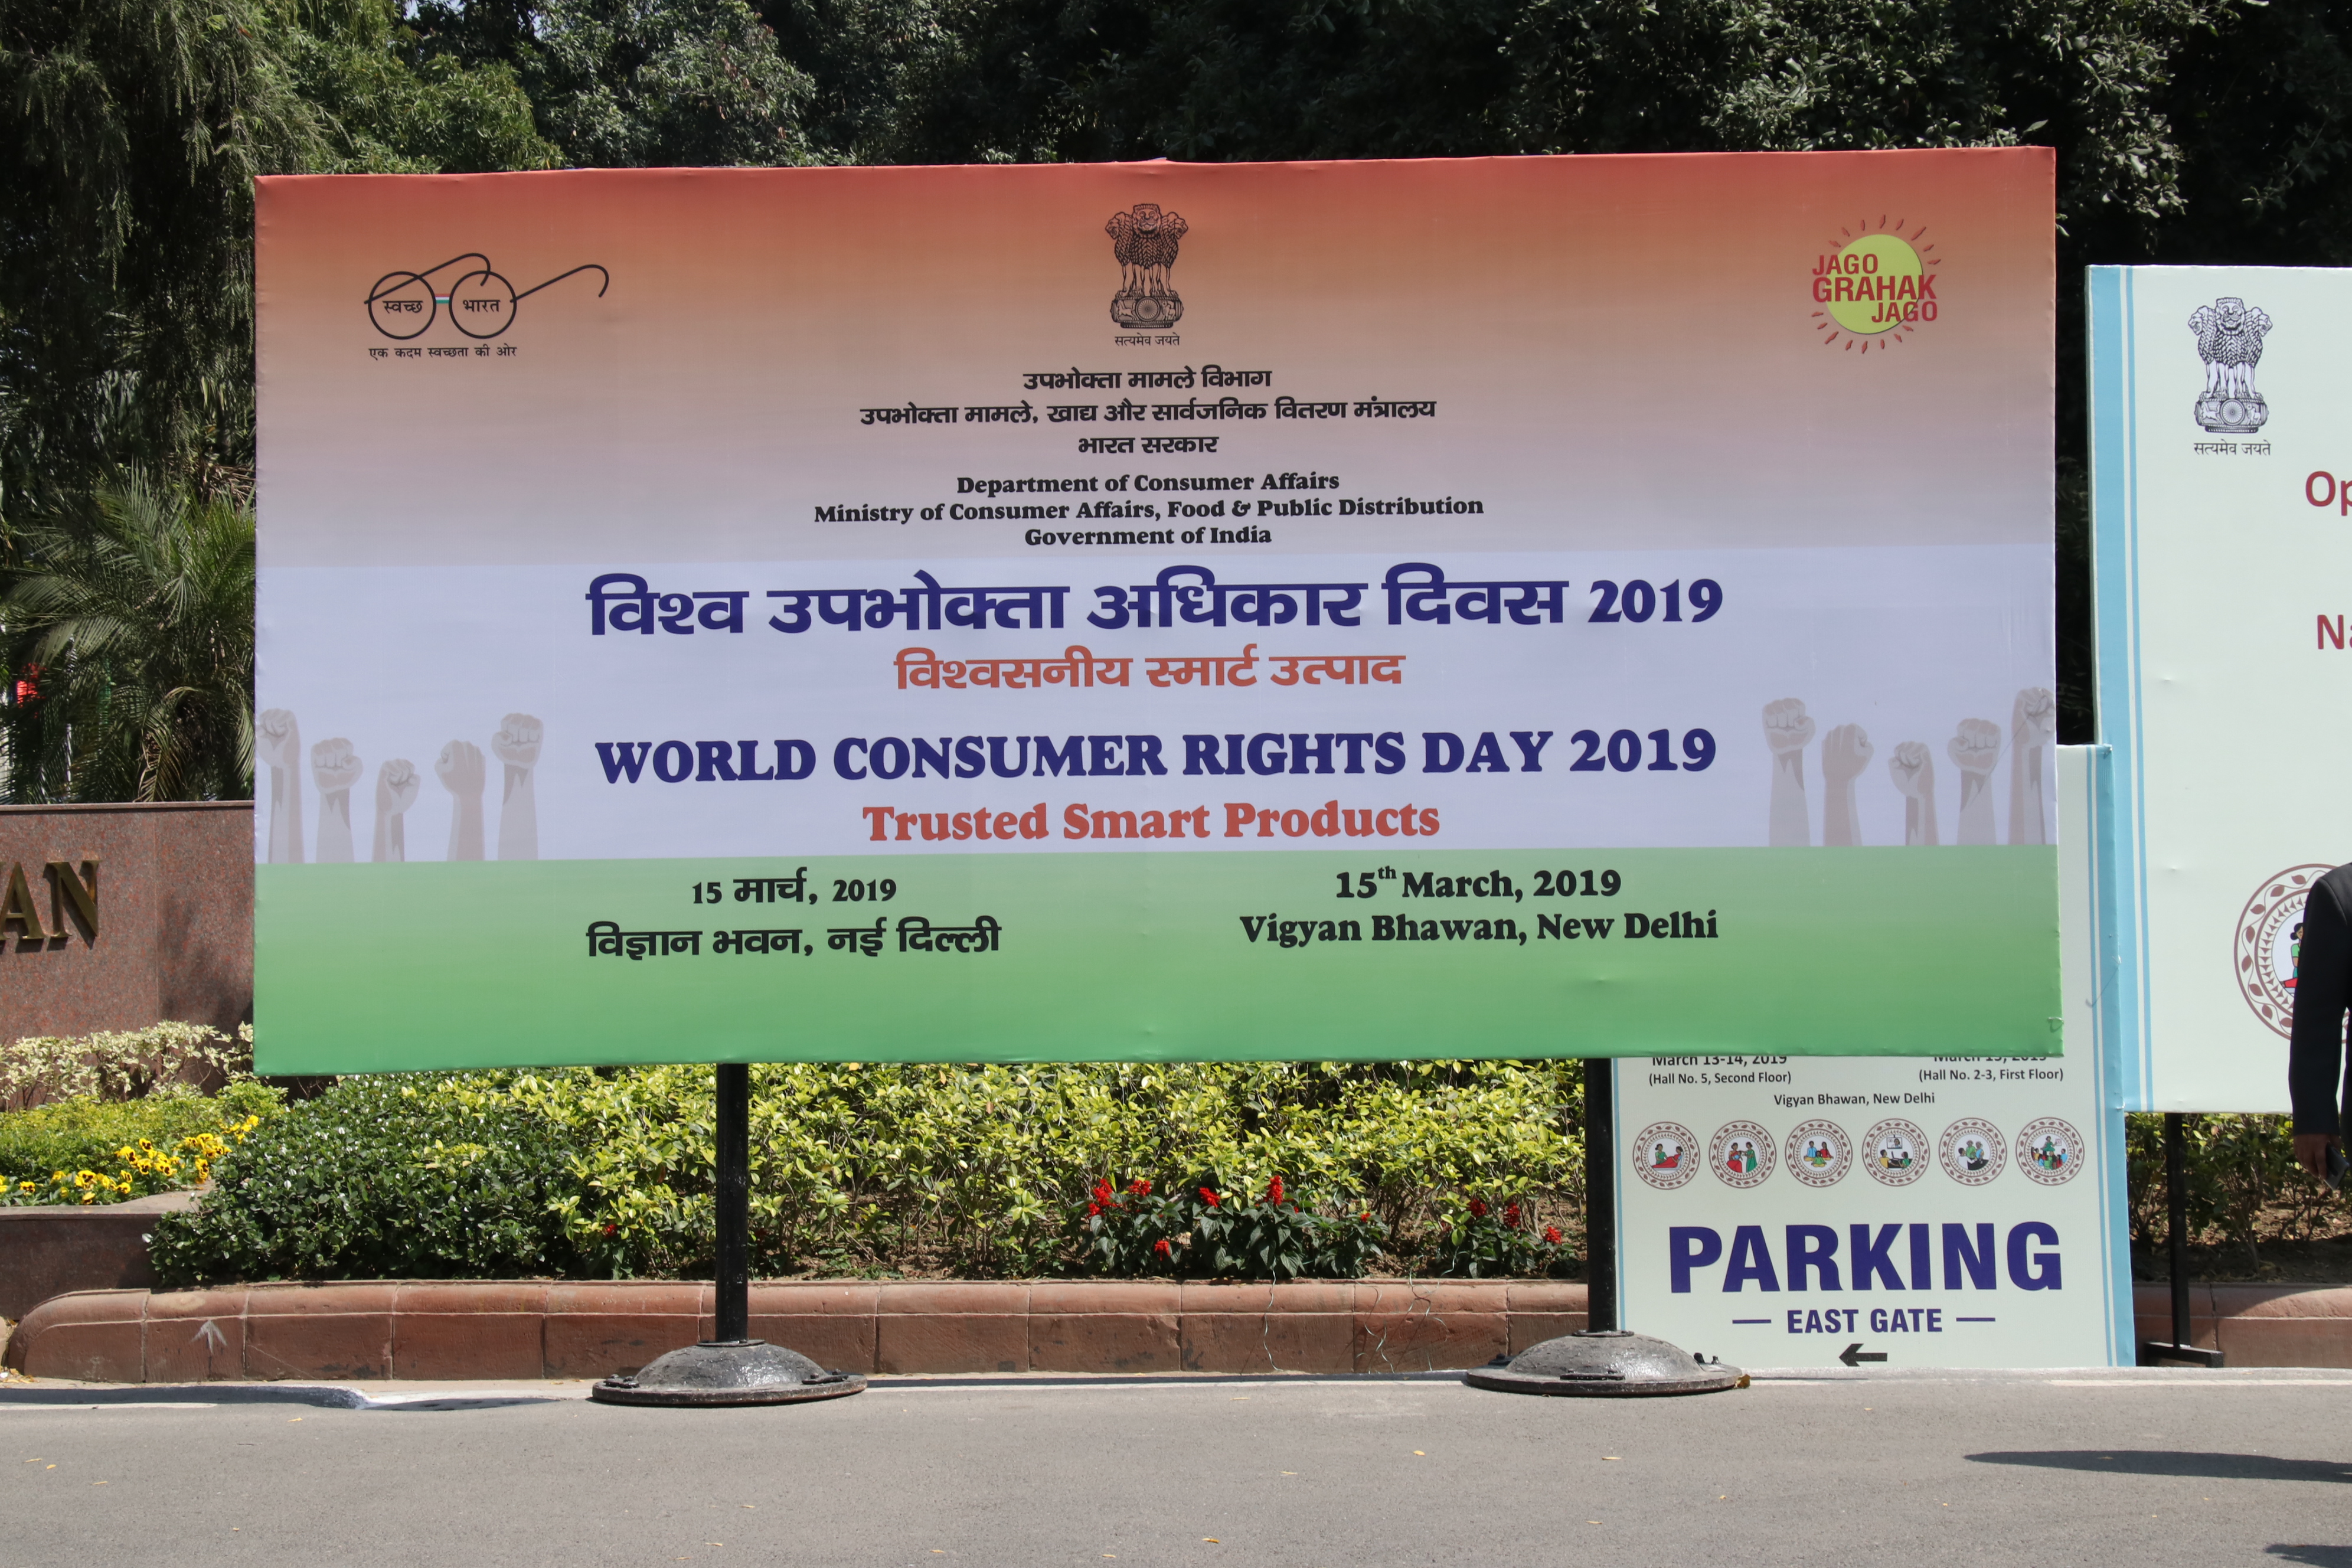 WORLD CONSUMER RIGHTS DAY 2019